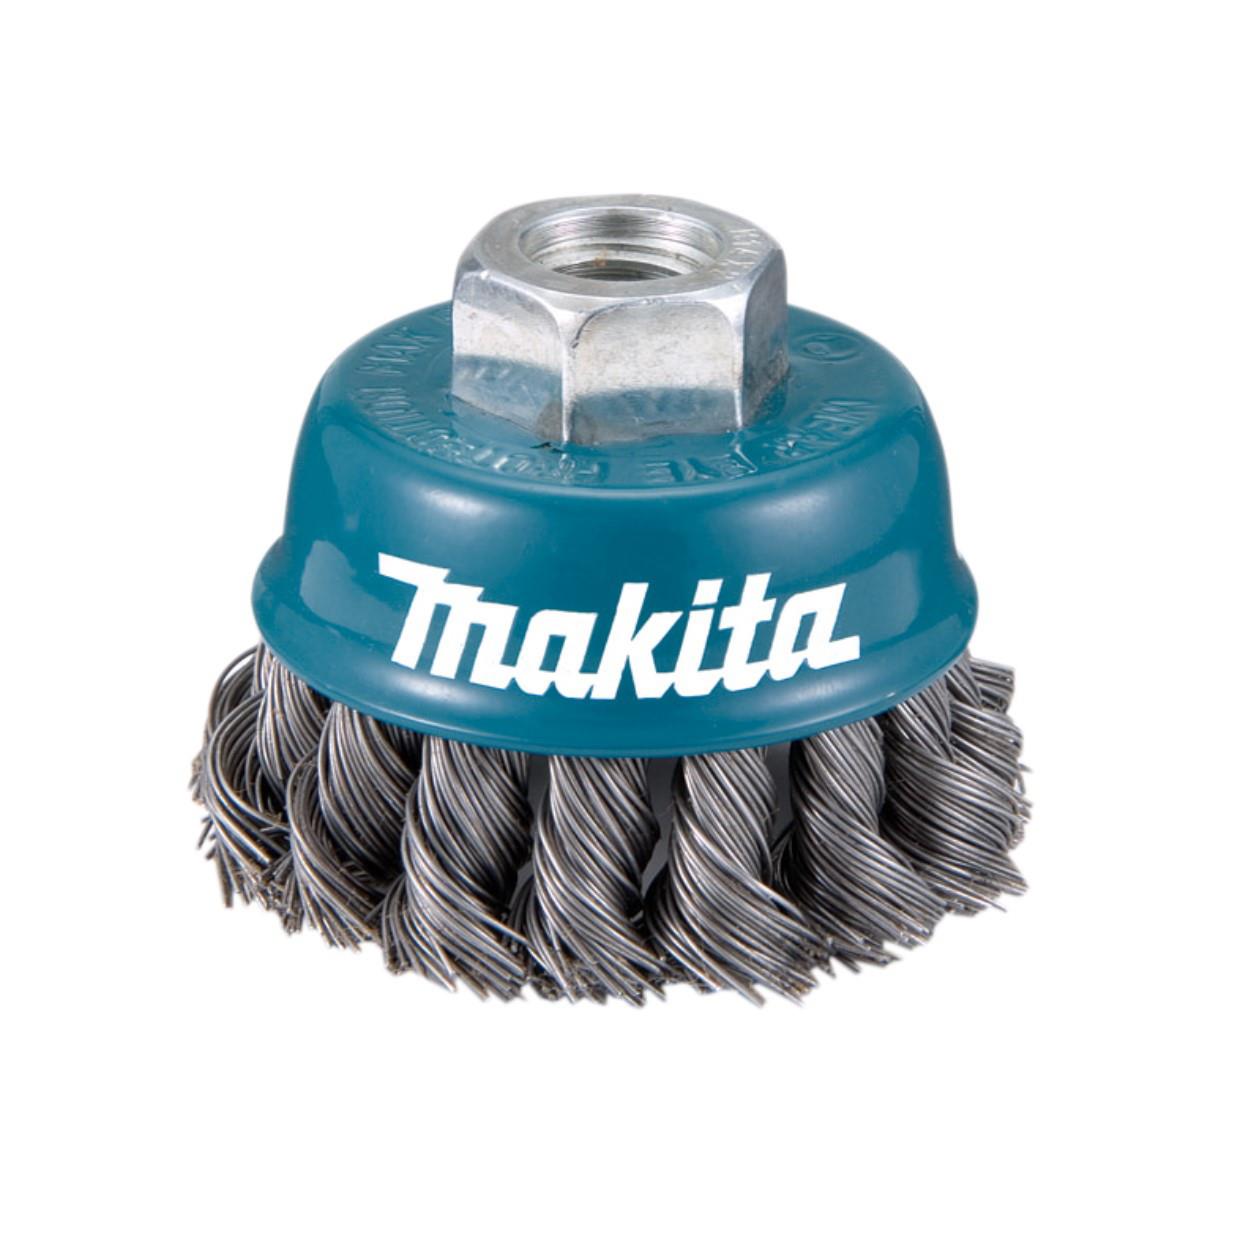 Makita D-24125 Knotted Wire Cup Brush; For Angle Grinder; 75mm Diameter; M10 x 1.5 Spindle Thread